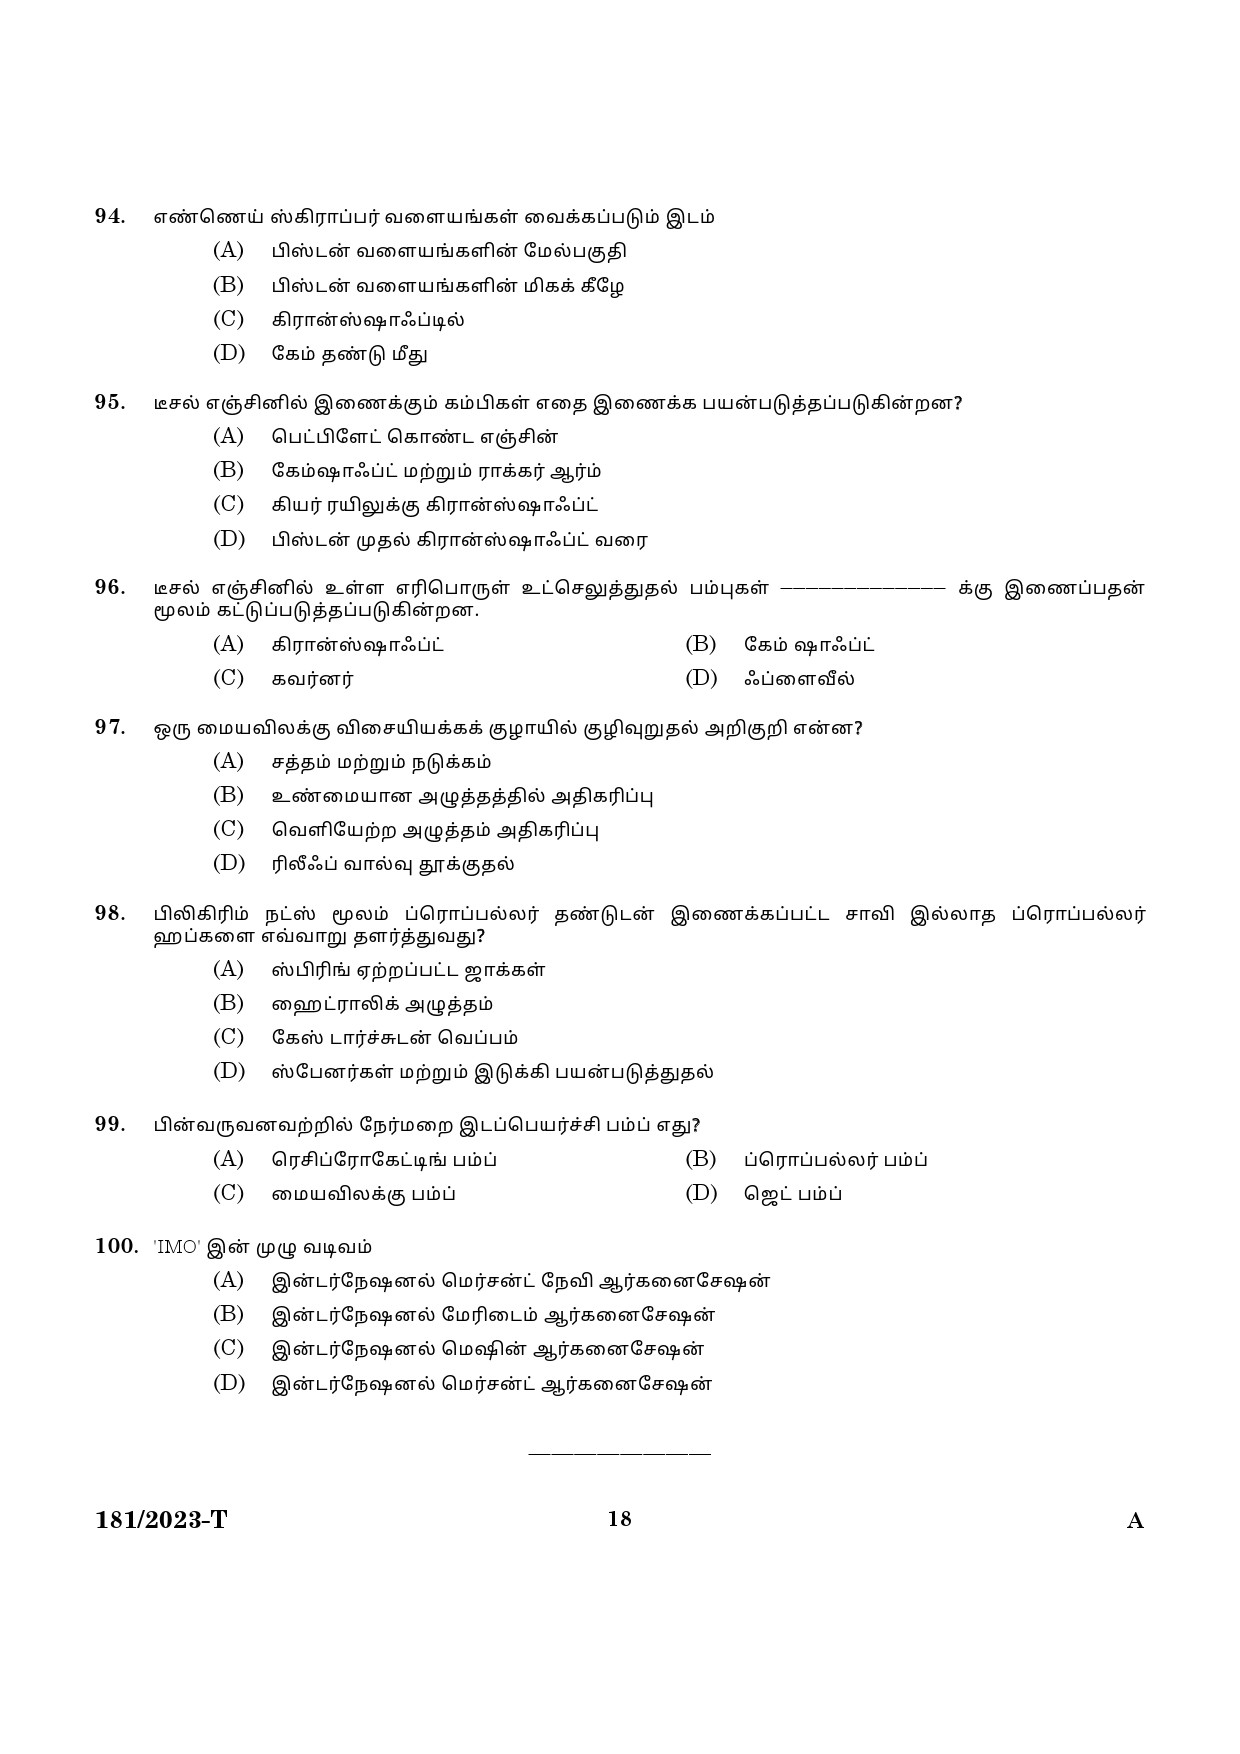 KPSC Forest Boat Driver Tamil Exam 2023 Code 1812023 T 16